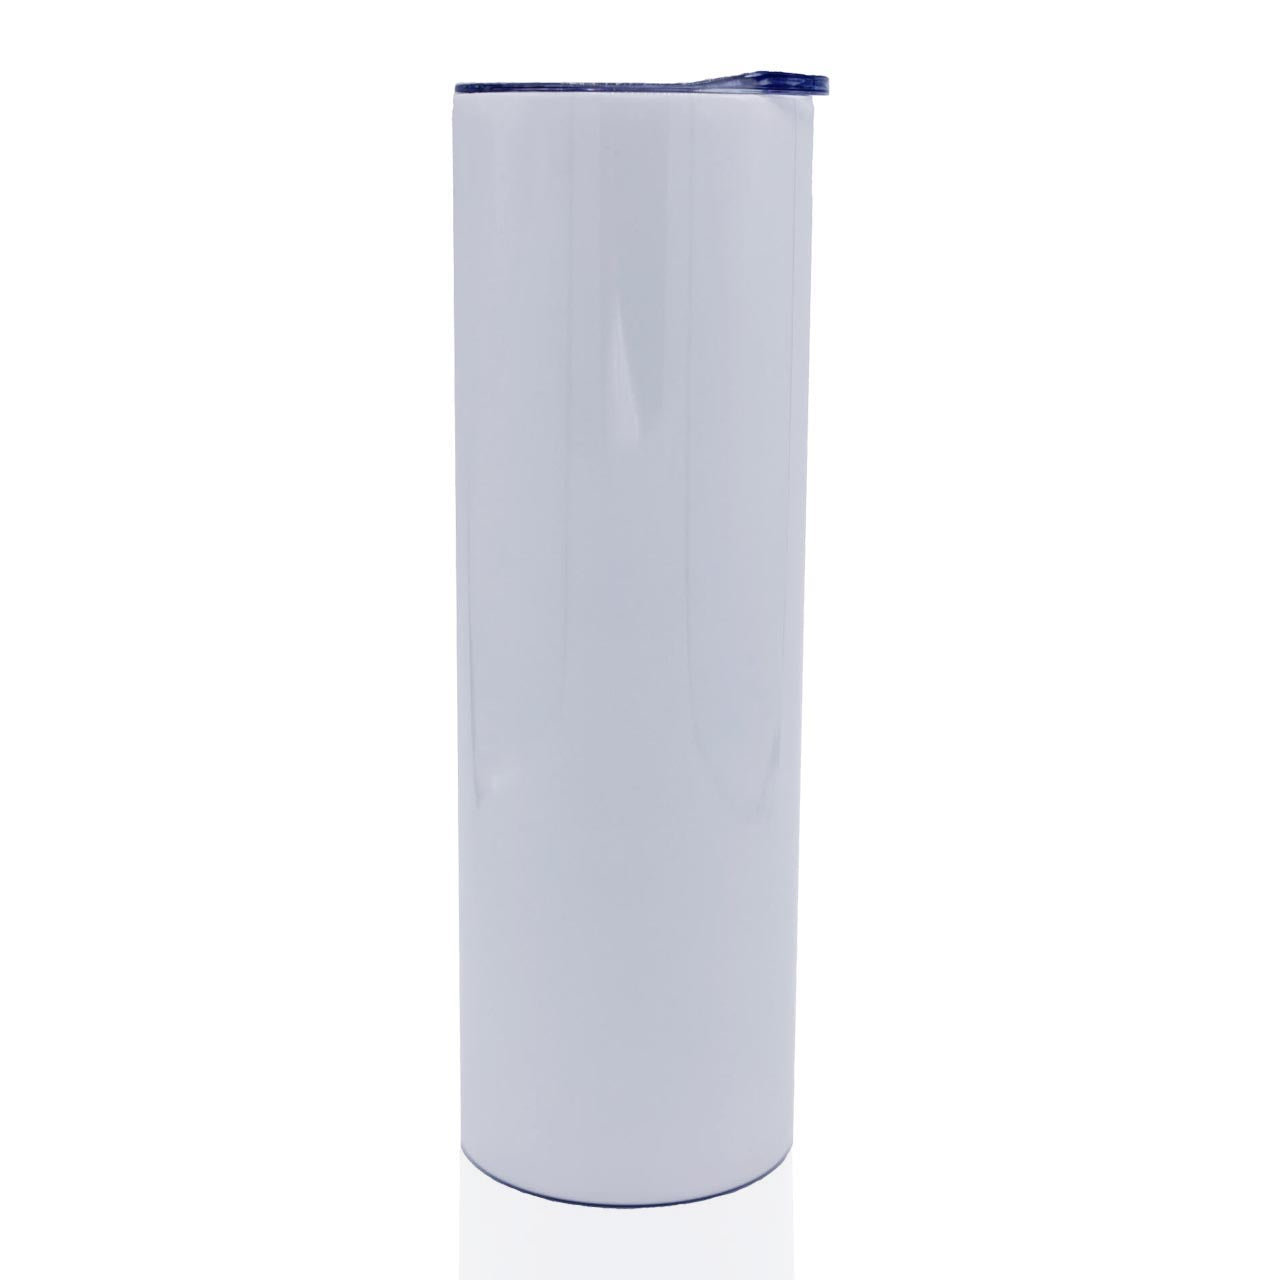 Sublimation Straight 30 Oz Sublimation Tumblers With Straw Blanks